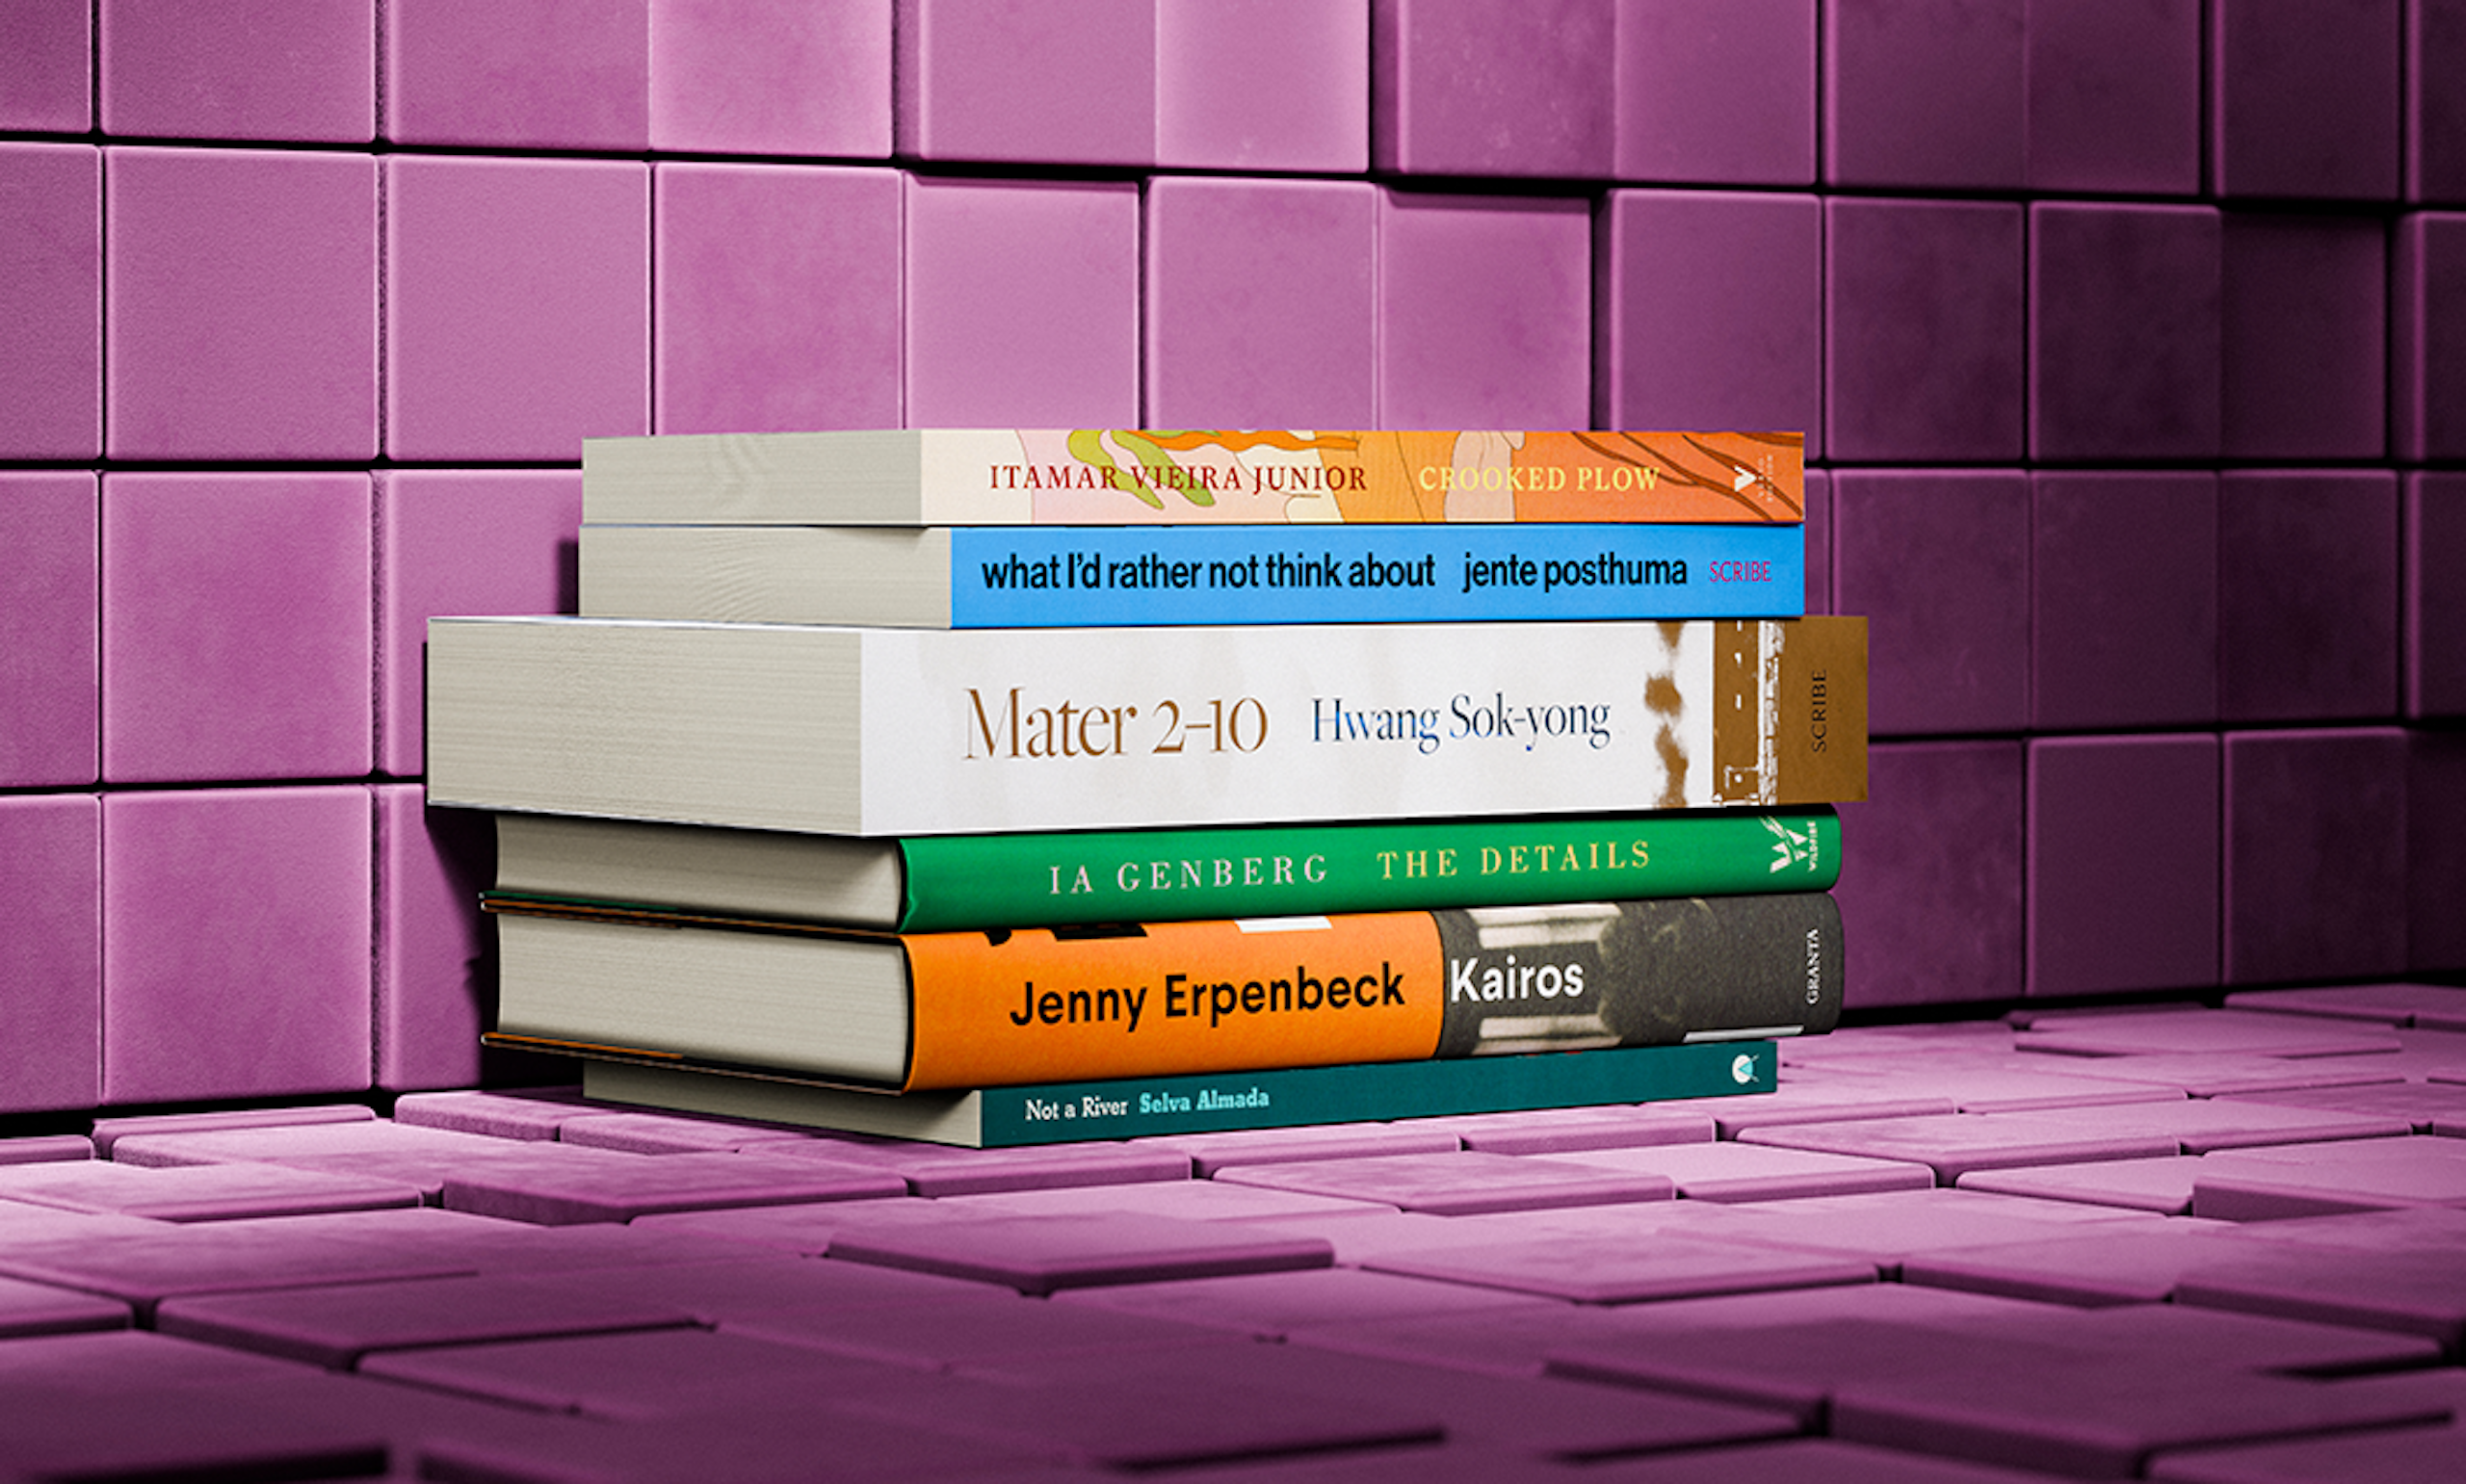 Six books in a pile against a purple wall